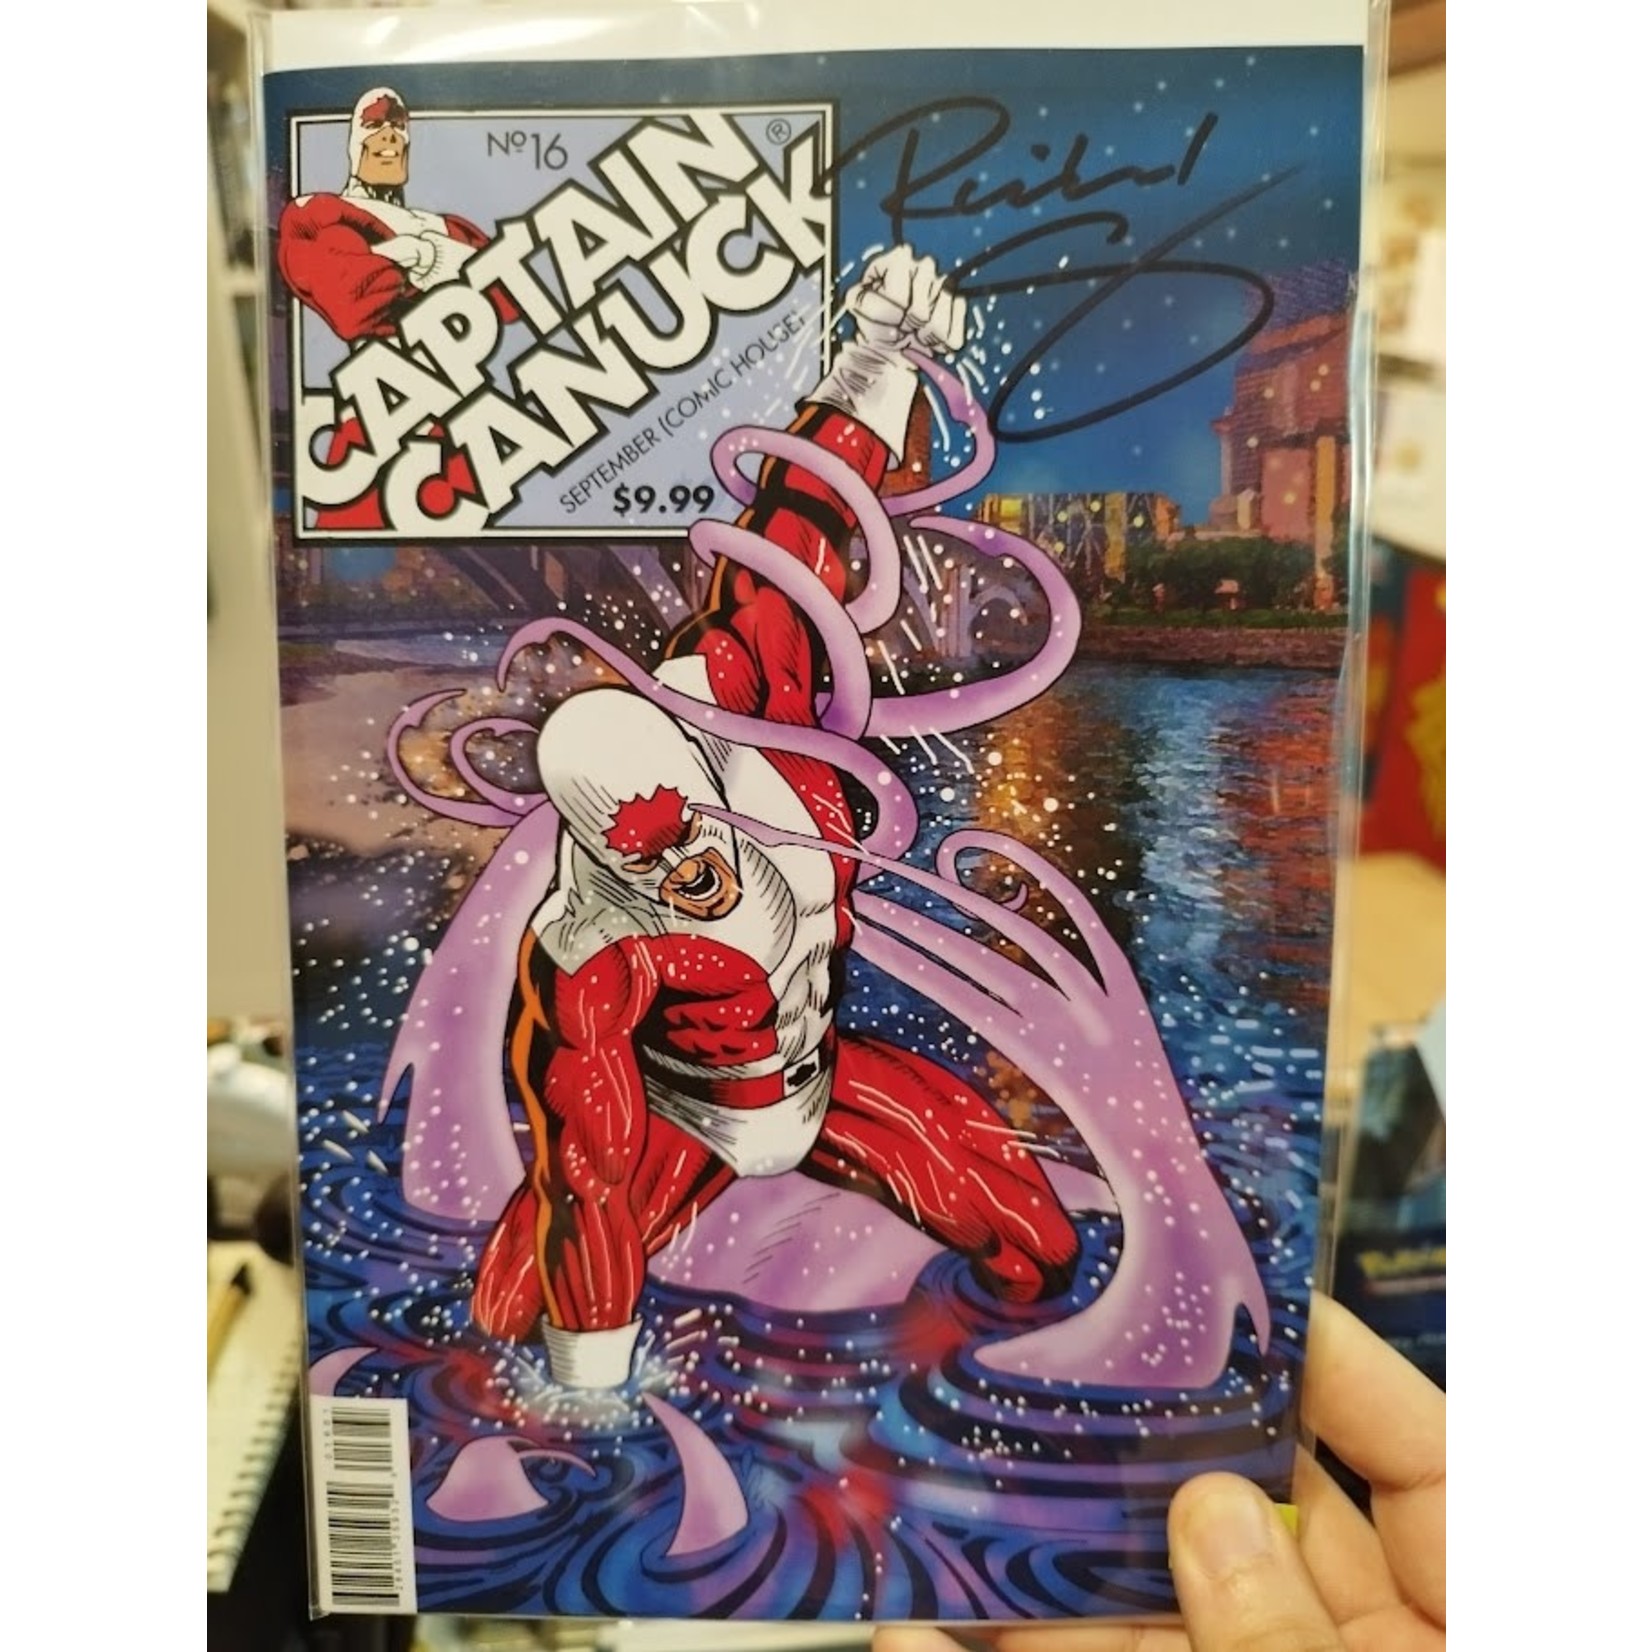 Chapterhouse Captain Canuck #16 (Richard Comely Variant) Signed by Creator Richard Comely